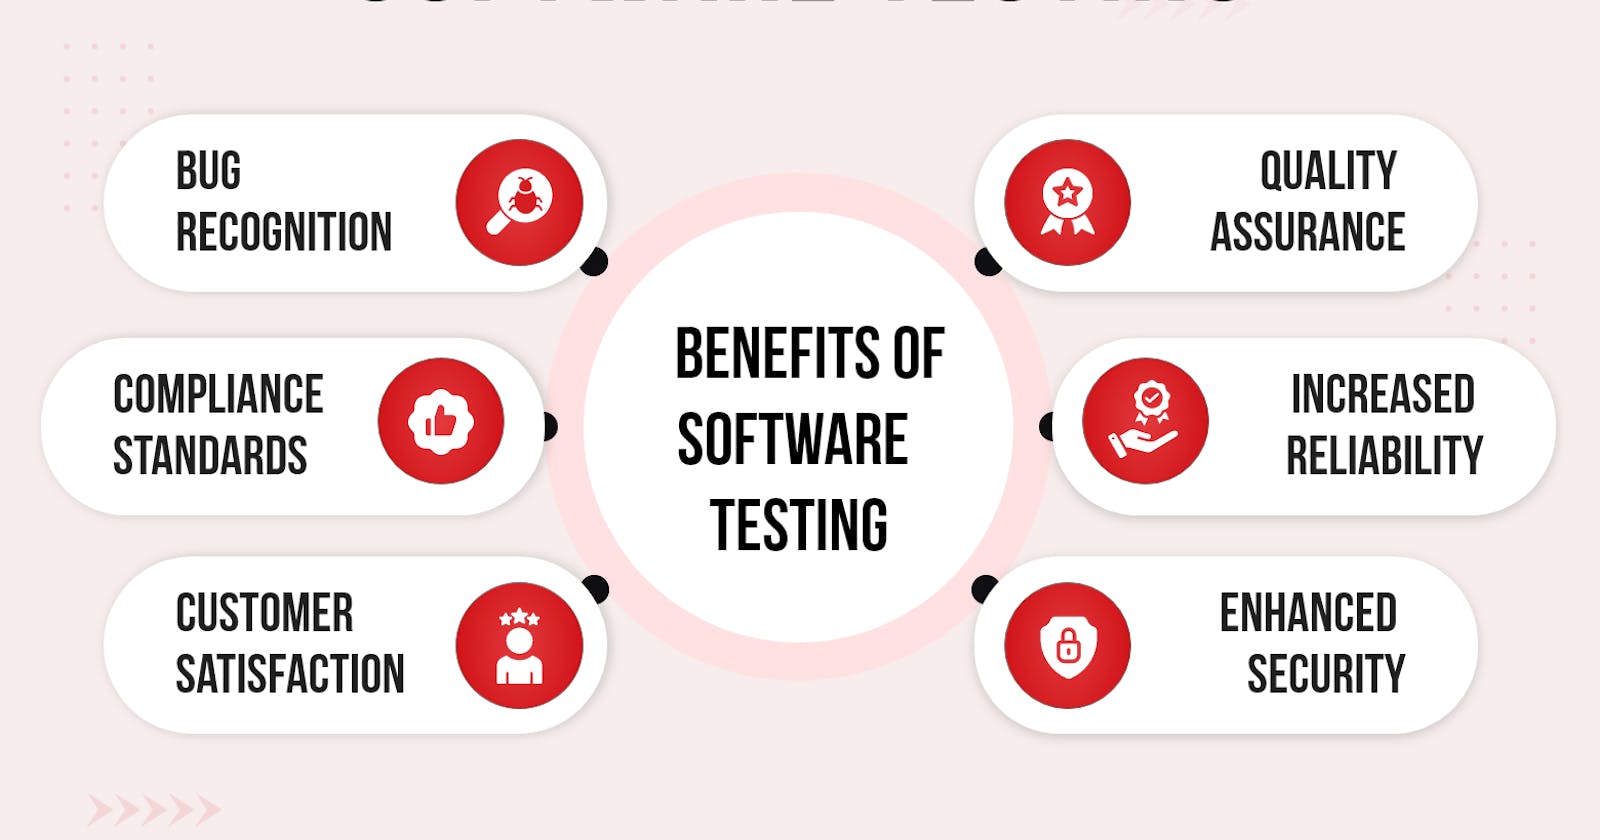 Step-by-Step Guide to Software Testing